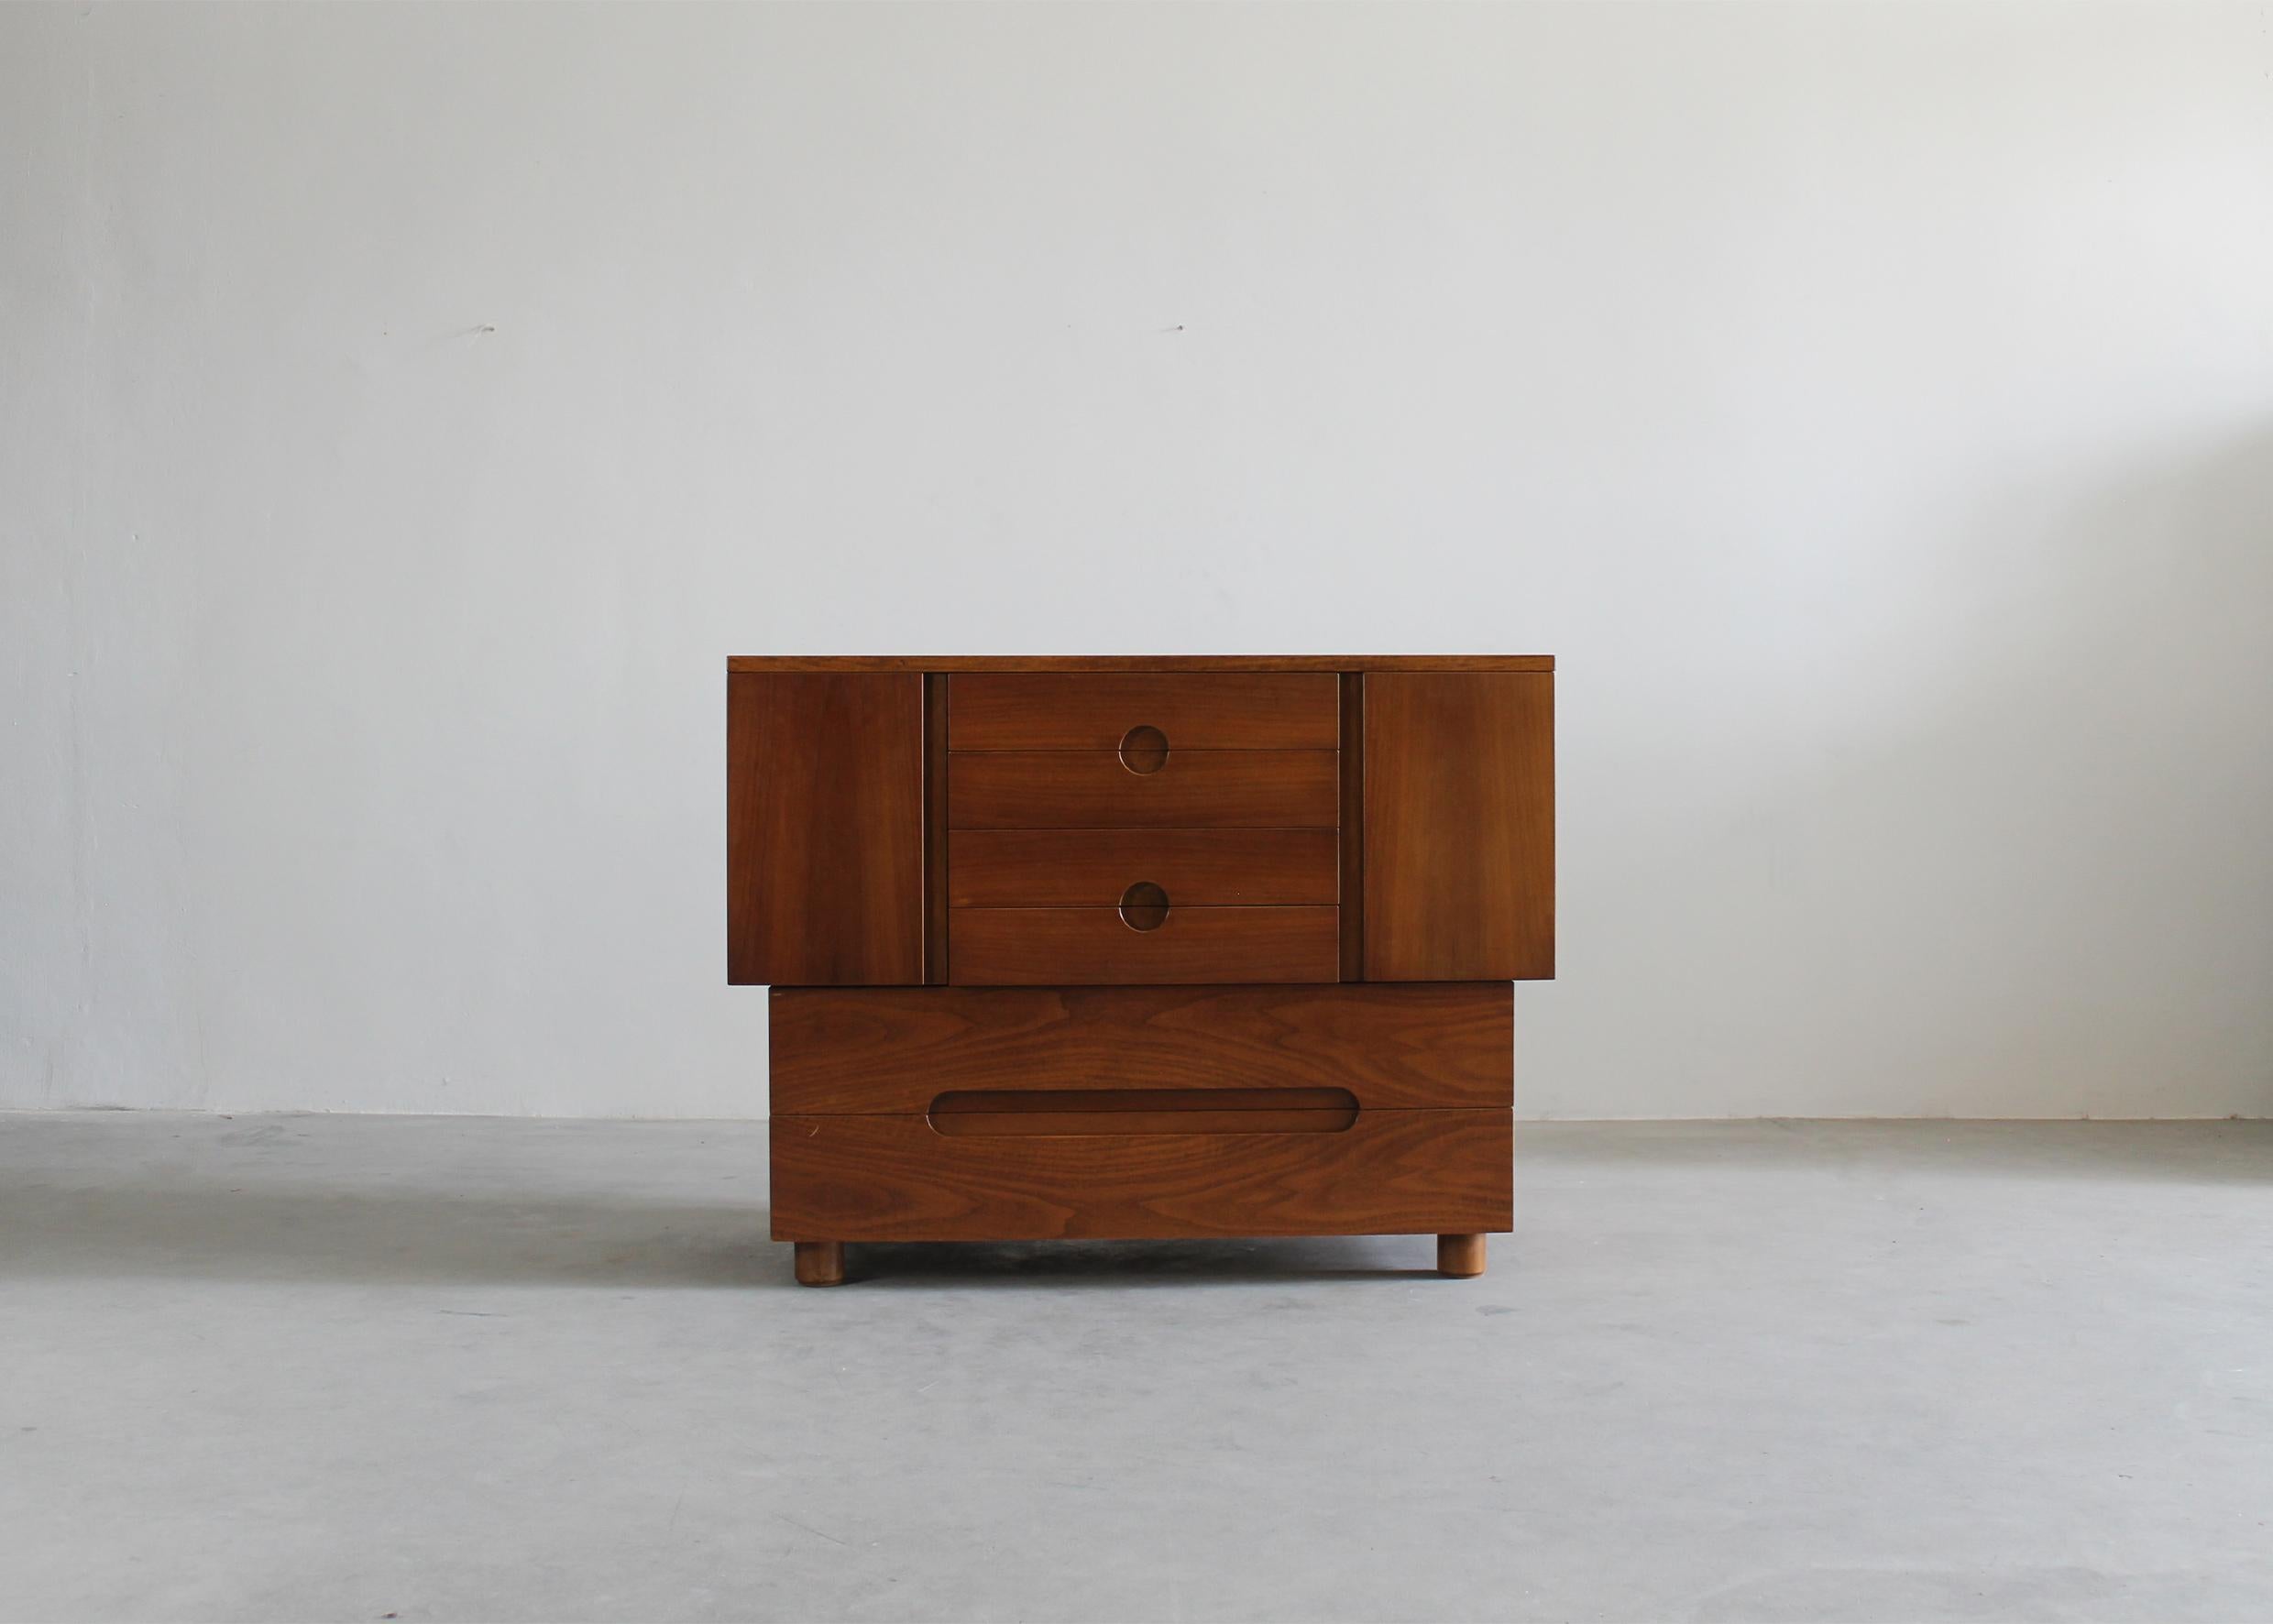 Rare dresser Serena entirely realized in walnut wood, with two frontal doors and six drawers (four smaller on the high side and two bigger on the bottom side).

Designed by Giovanni Michelucci for Poltronova, 1955, Italy. 

Signature engraved on a